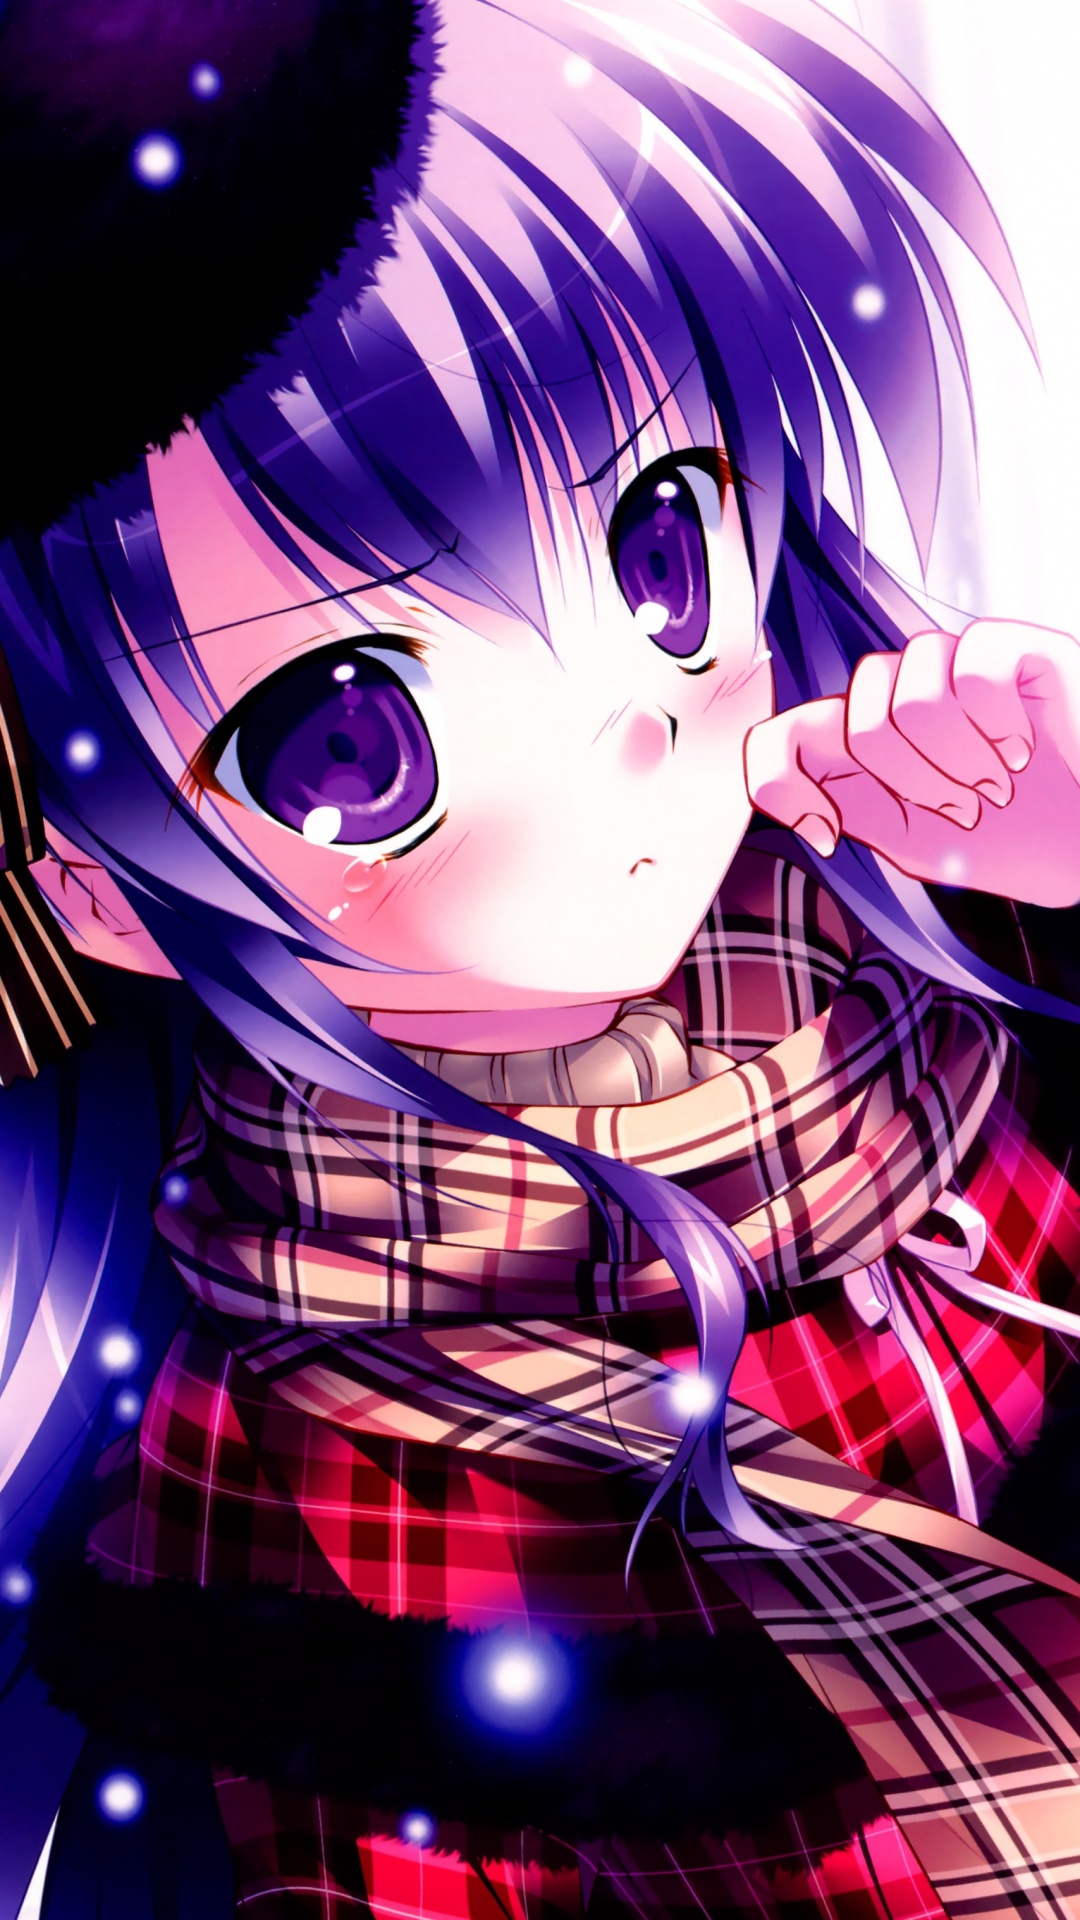 Purple Haired Girl Anime Character. Wallpaper in 1080x1920 Resolution